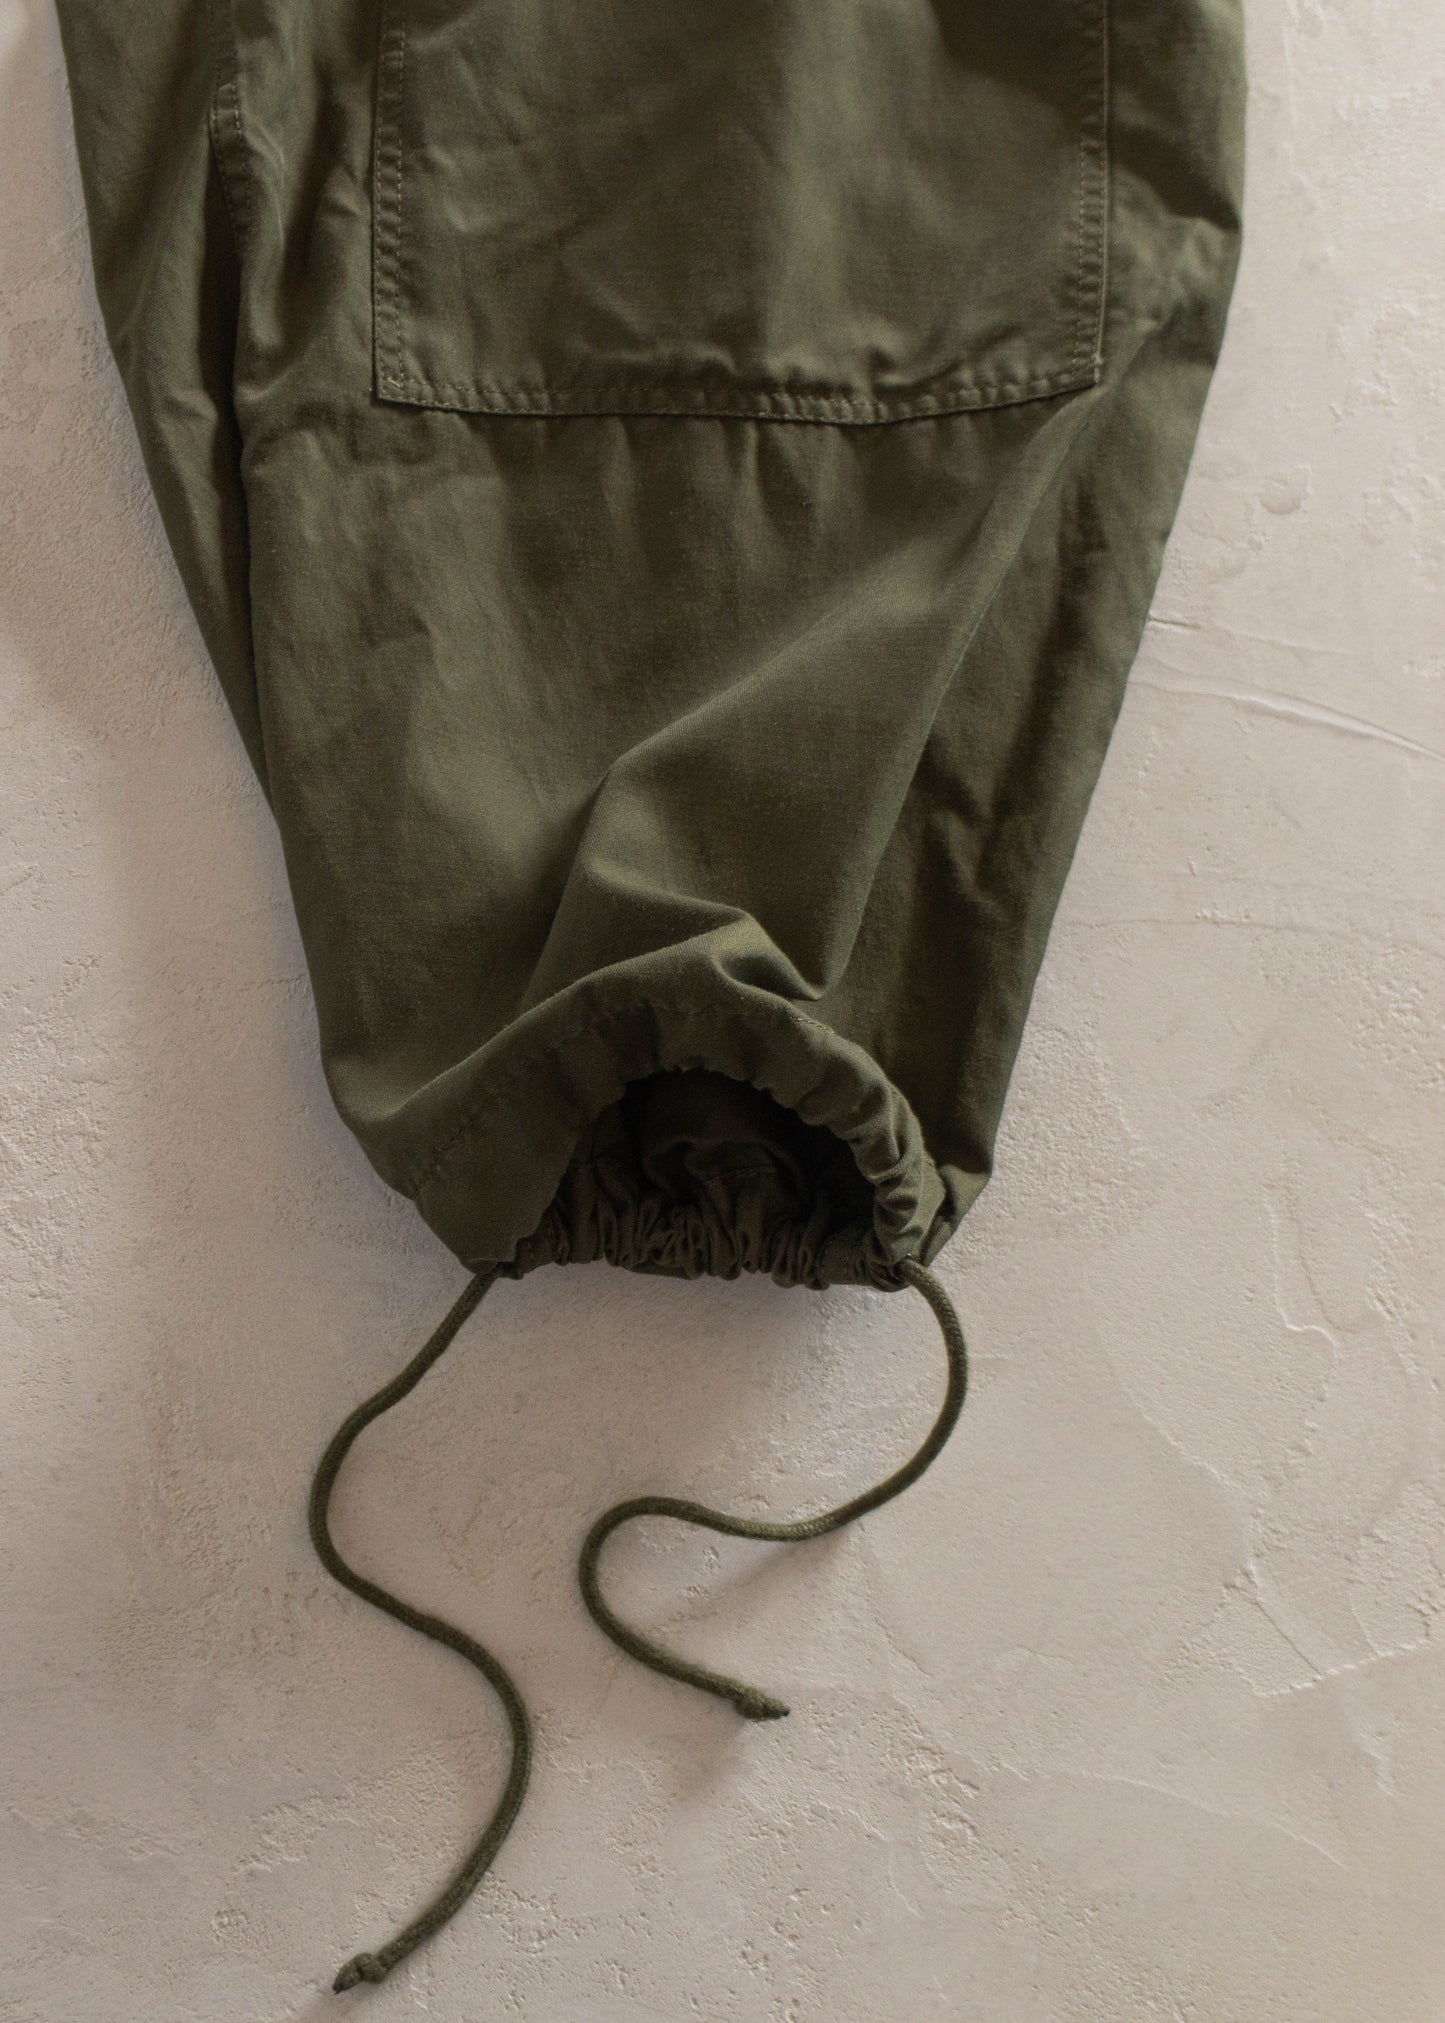 1970s Military Wind Cargo Pants Size XL/2XL